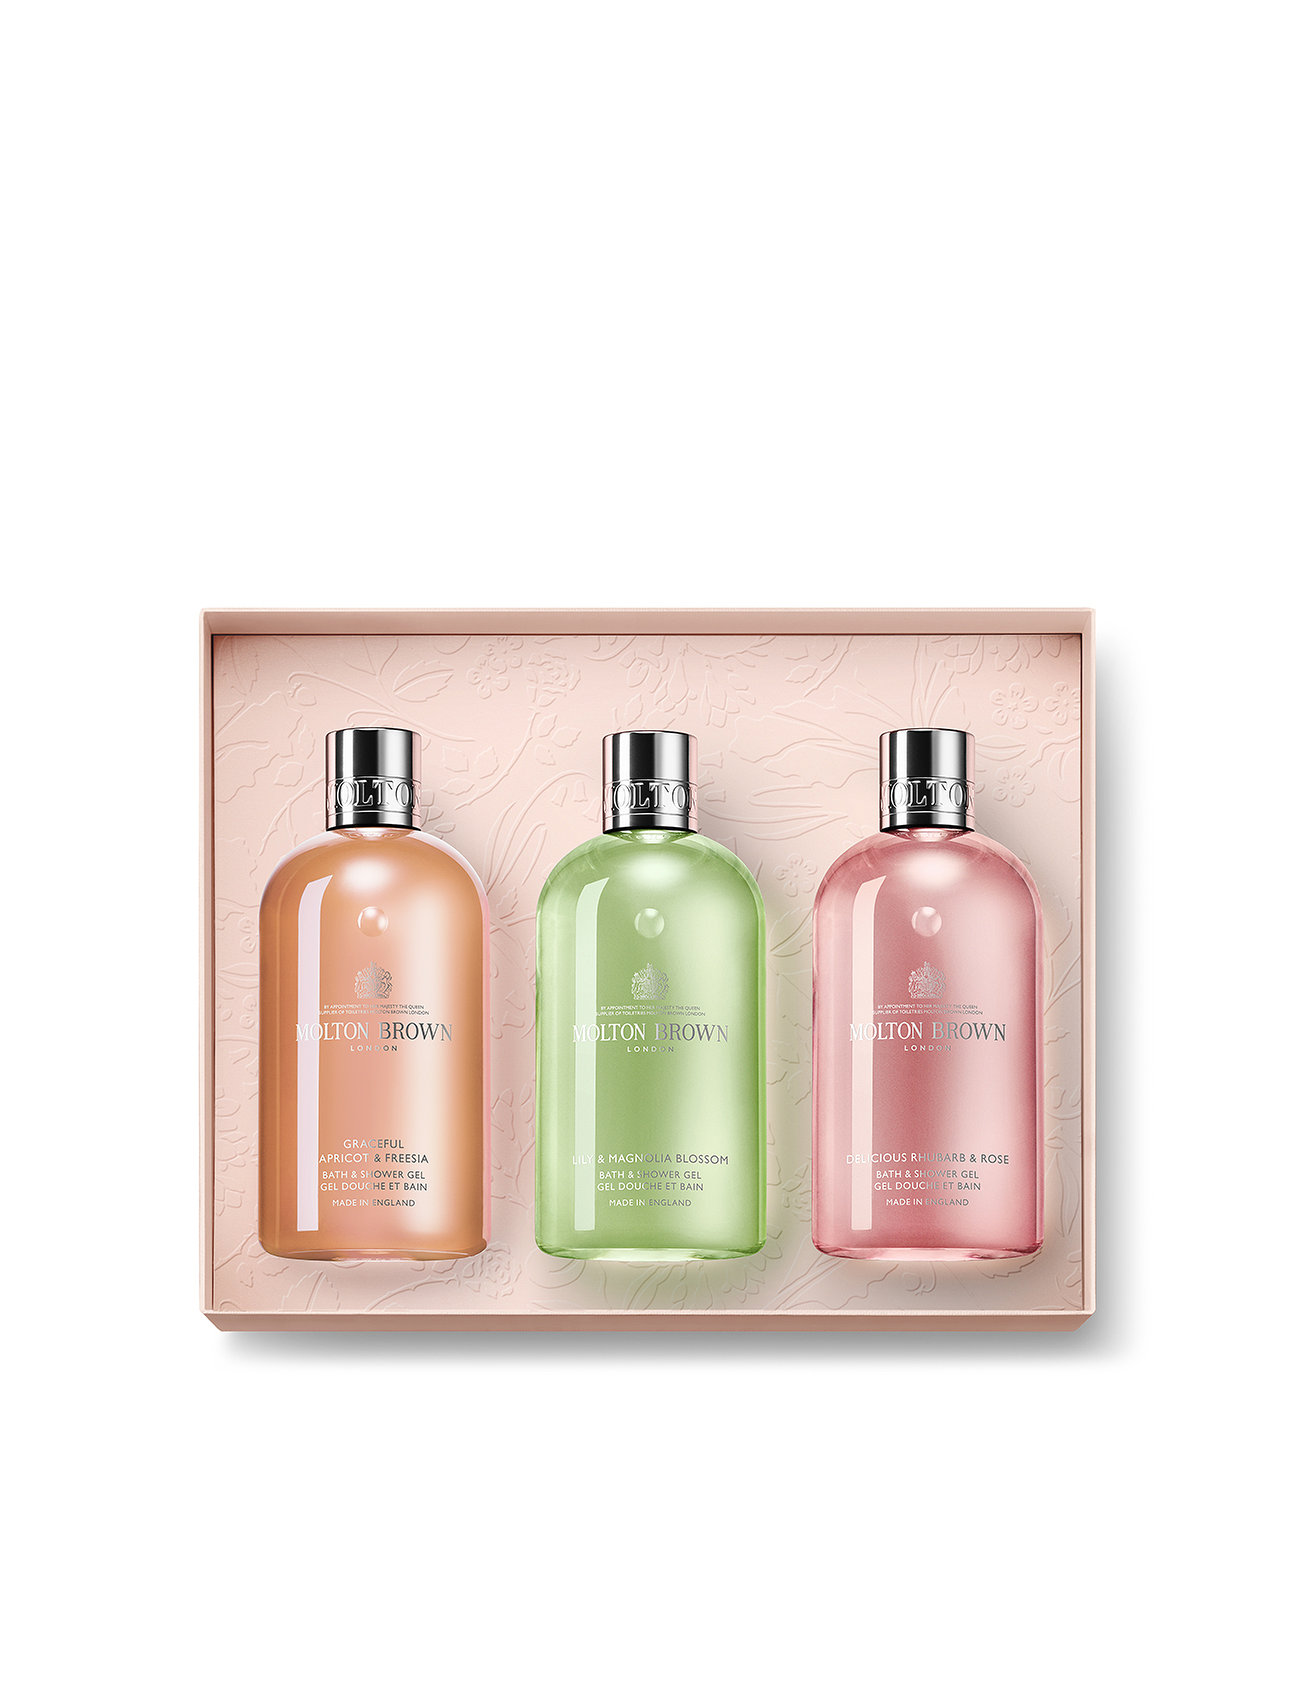 Gift Set Floral & Fruity Body Care Collection Set Bath & Body Nude Molton Brown